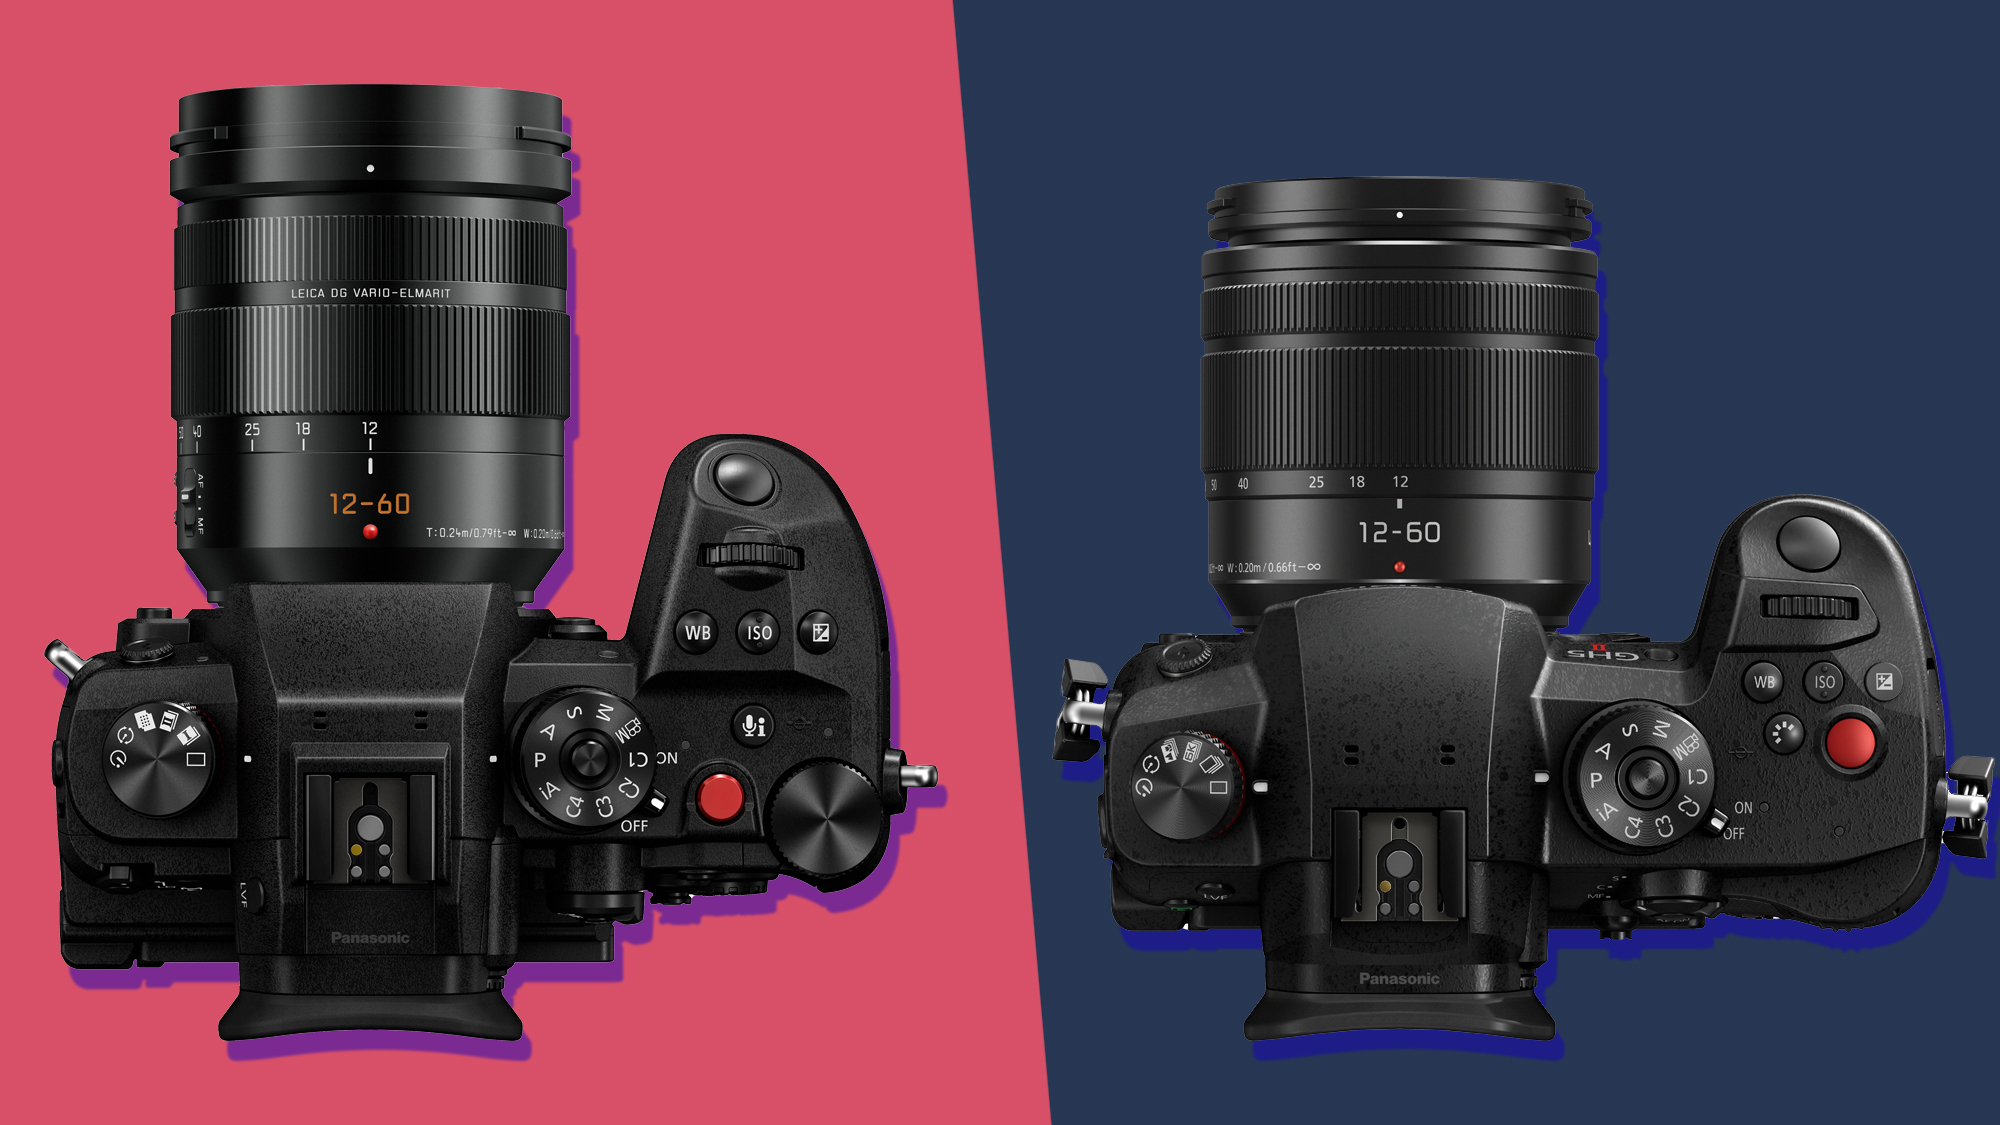 The Panasonic GH6 and GH5 II cameras next to each other